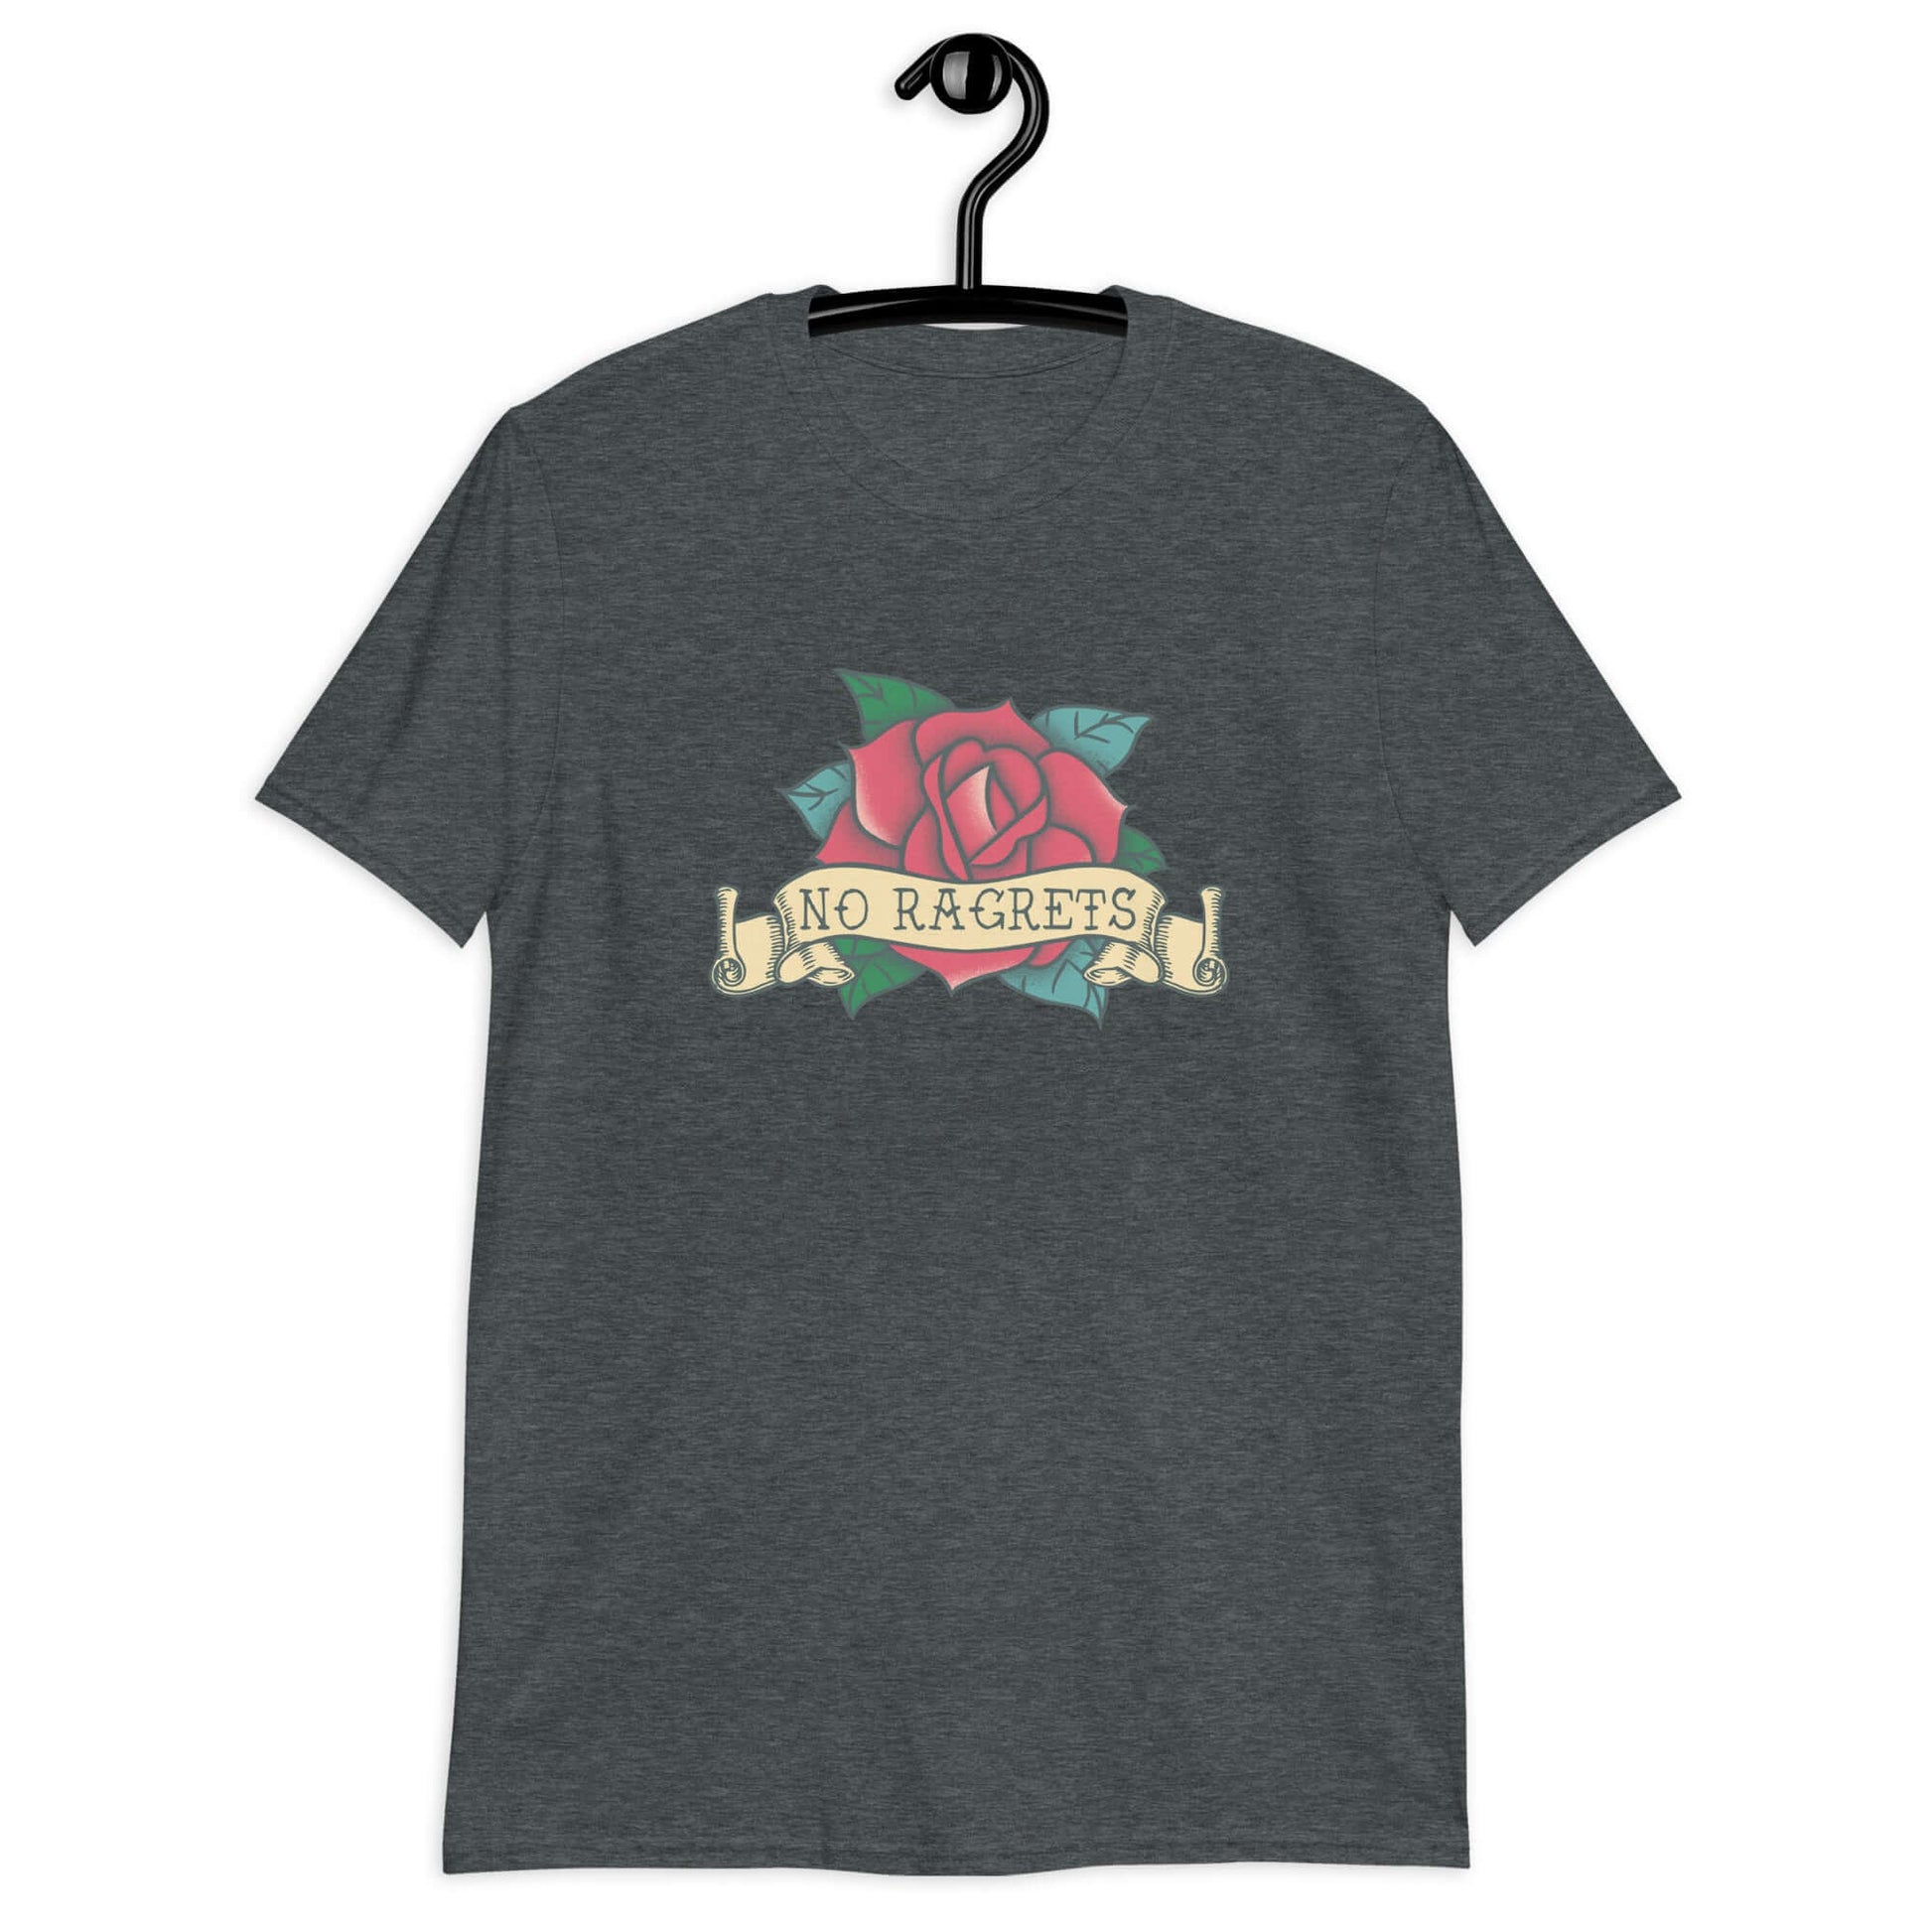 Dark heather grey t-shirt with a funny image of an old school rose flash tattoo & the words no ragrets. The word regrets is intentionally misspelled.